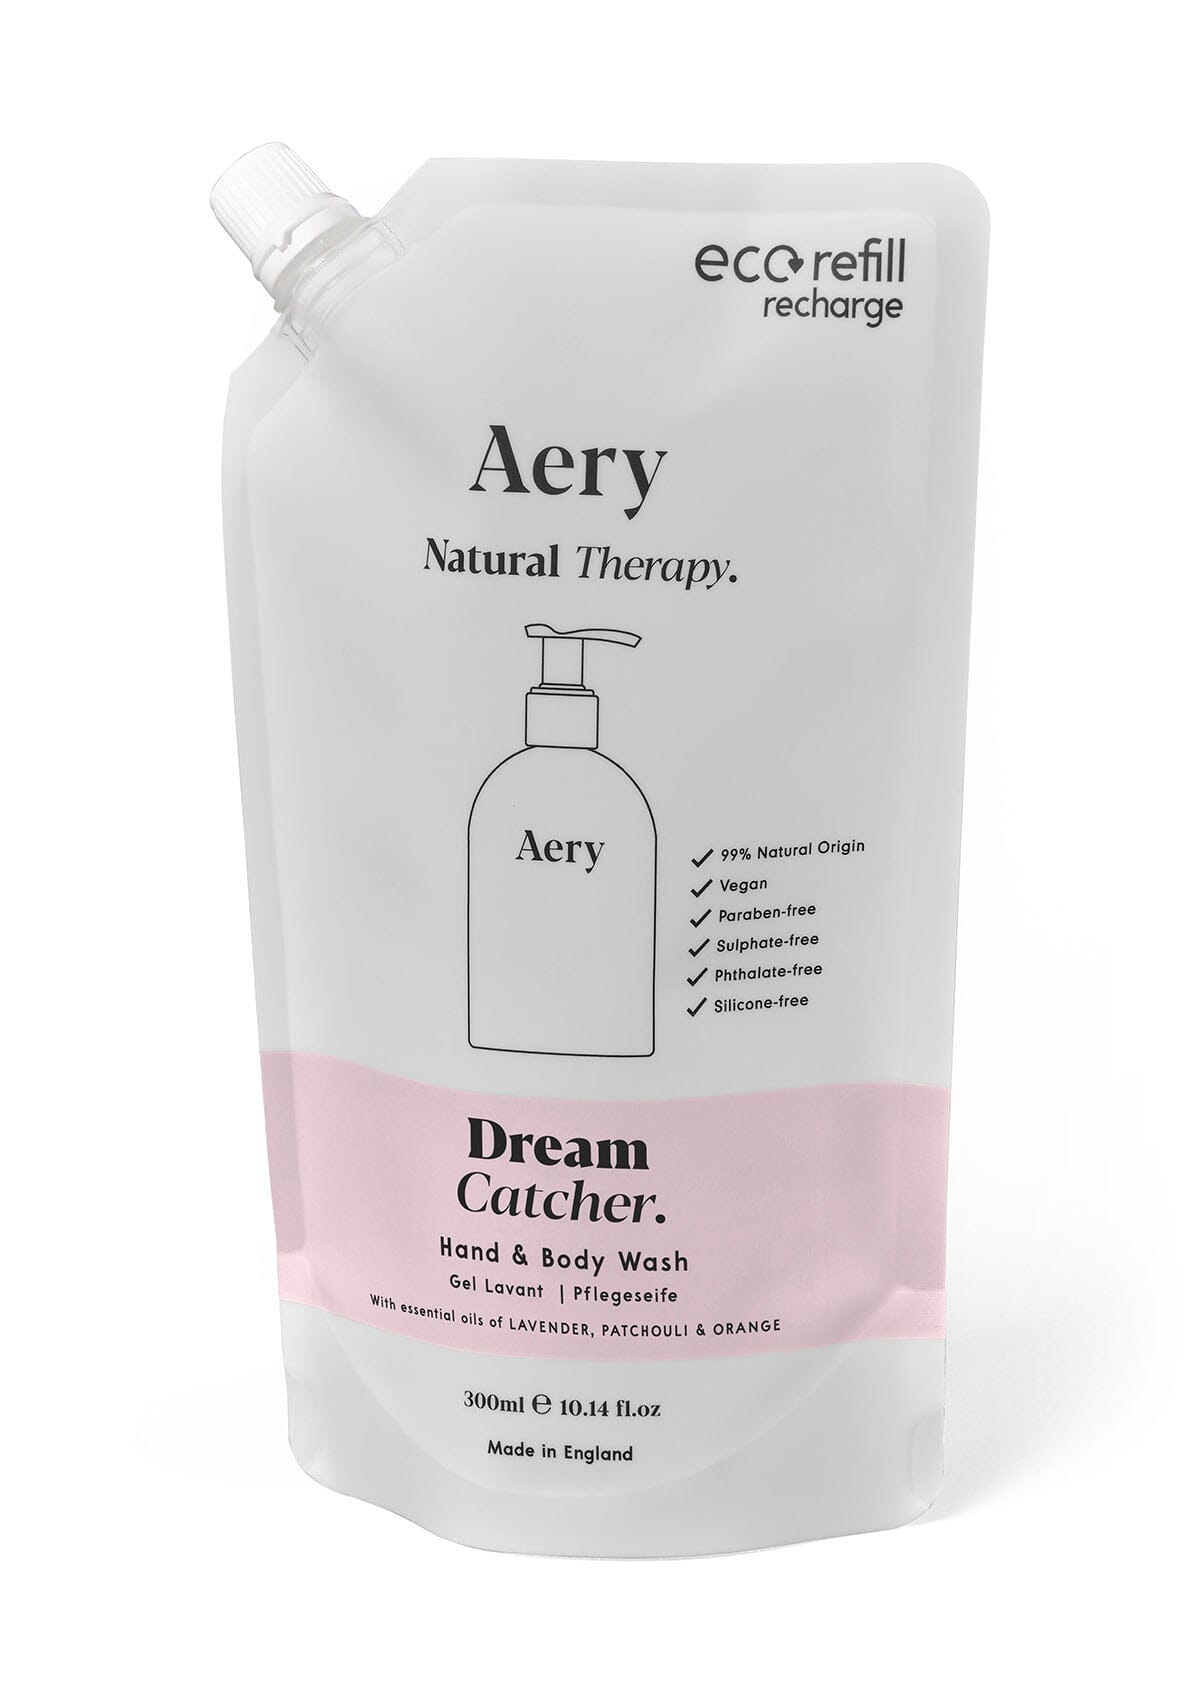 Lilac Dream catcher hand and body wash refill pouch by Aery displayed on white background 